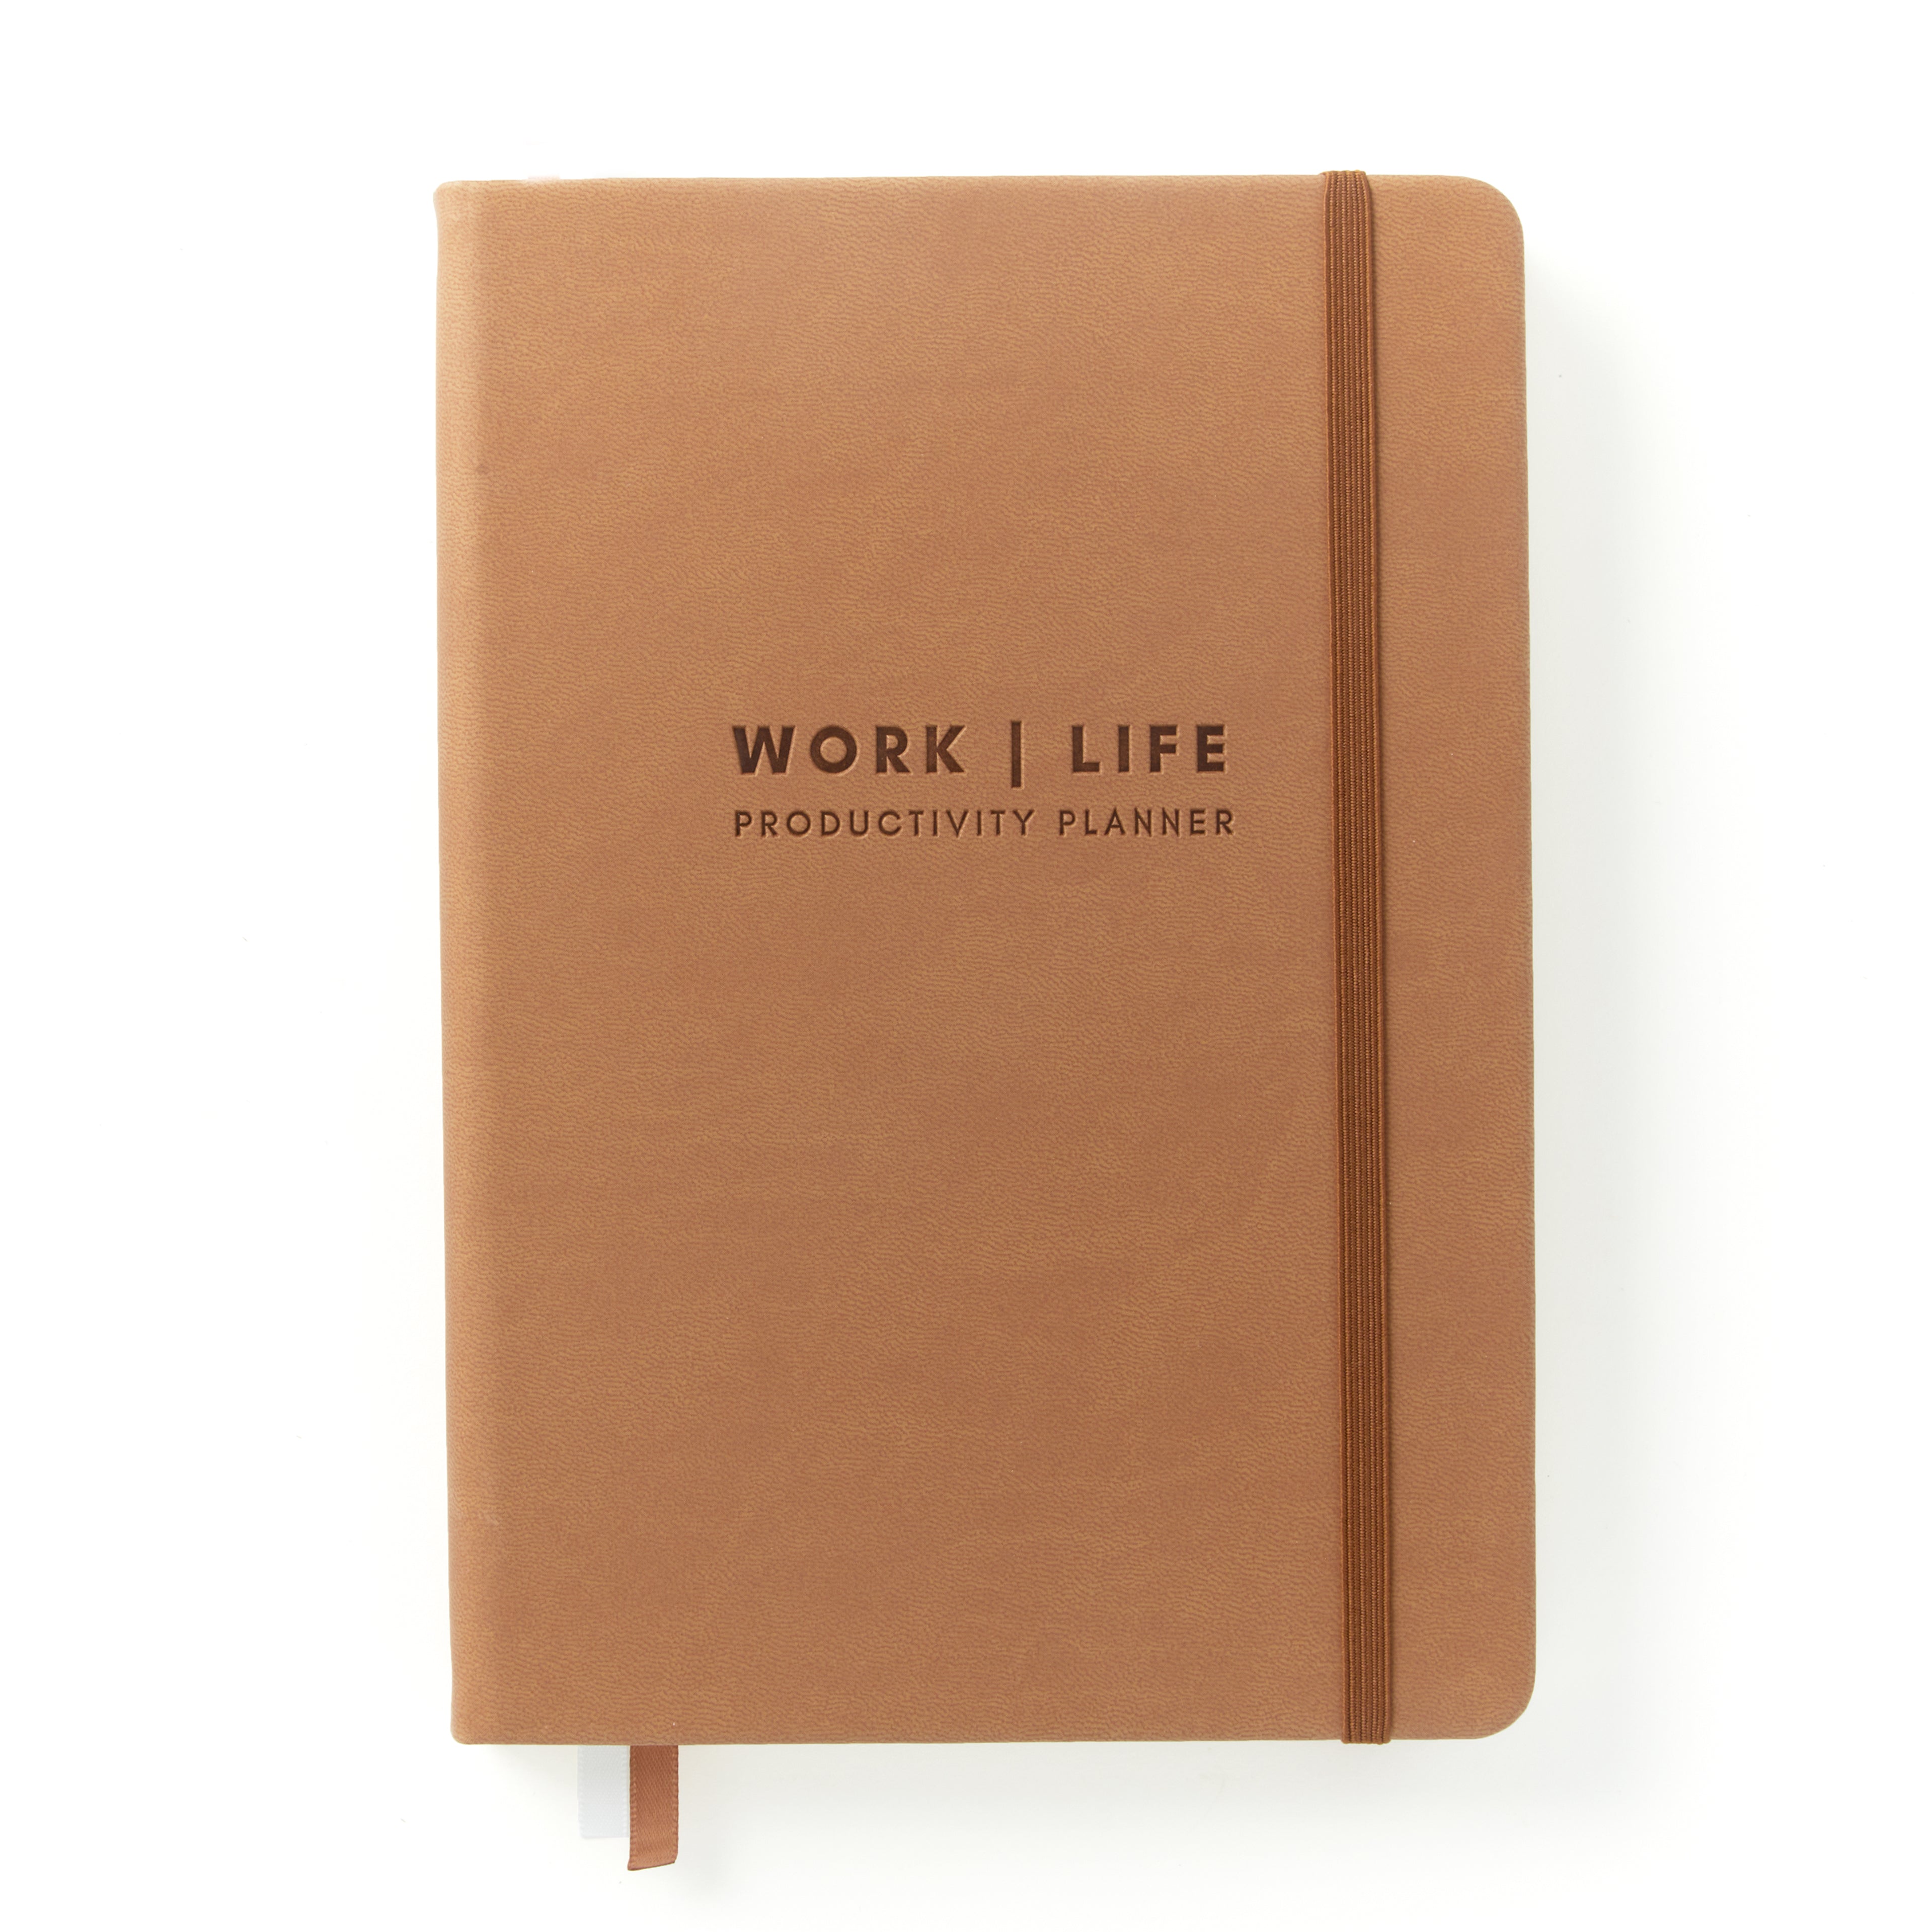 Accomplish Your Dreams with a Goal-Oriented Productivity Planner